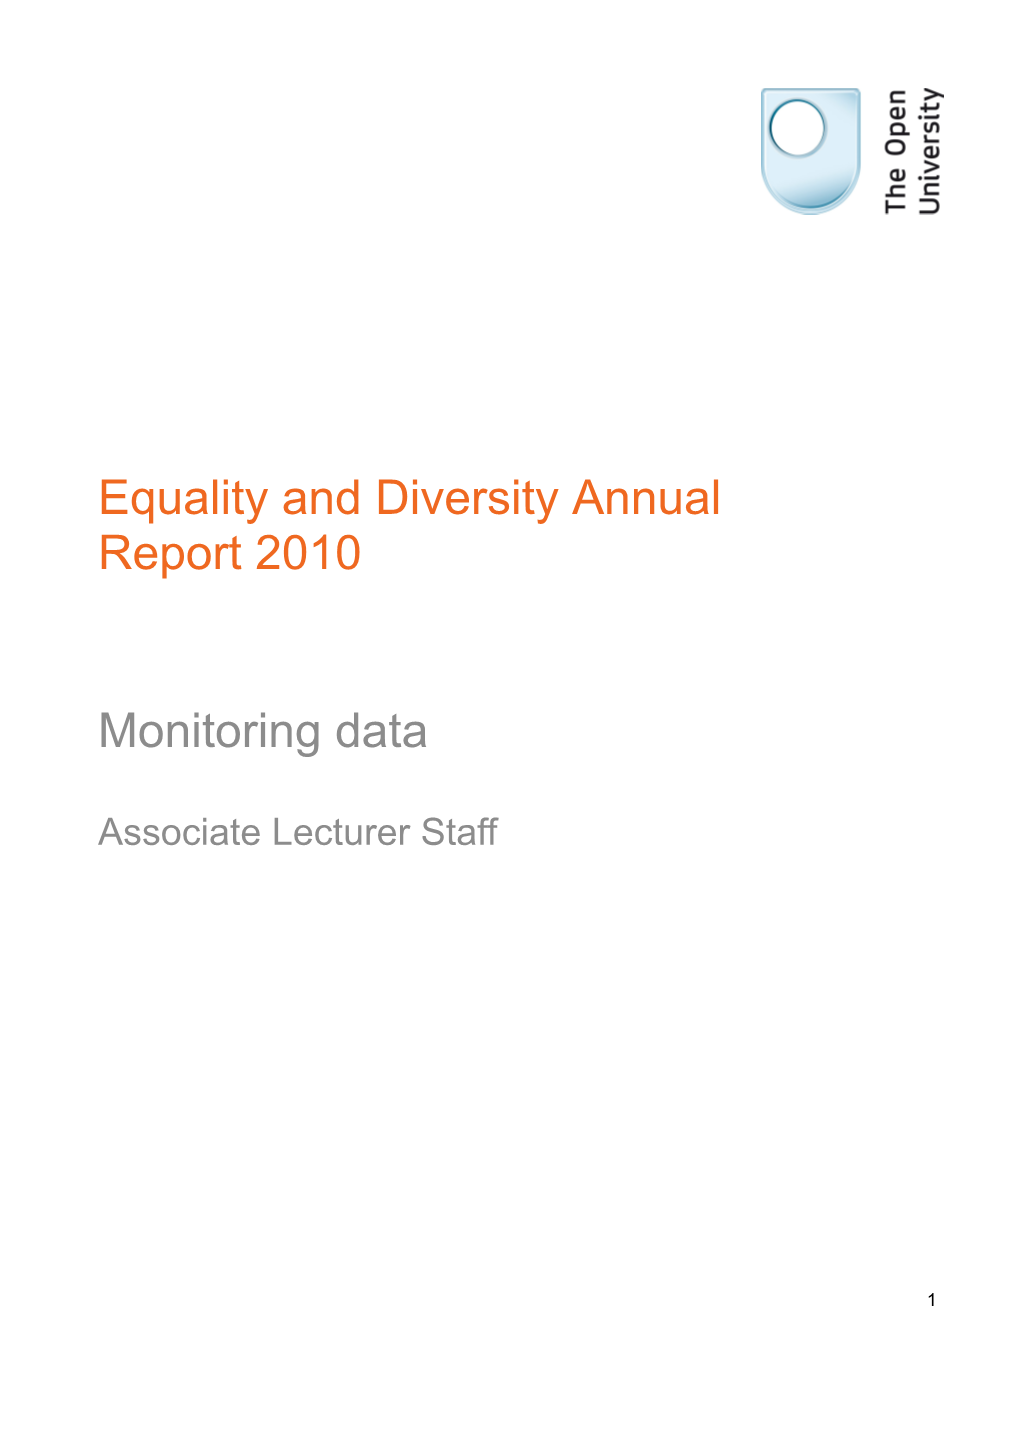 Equality and Diversity Annual Report